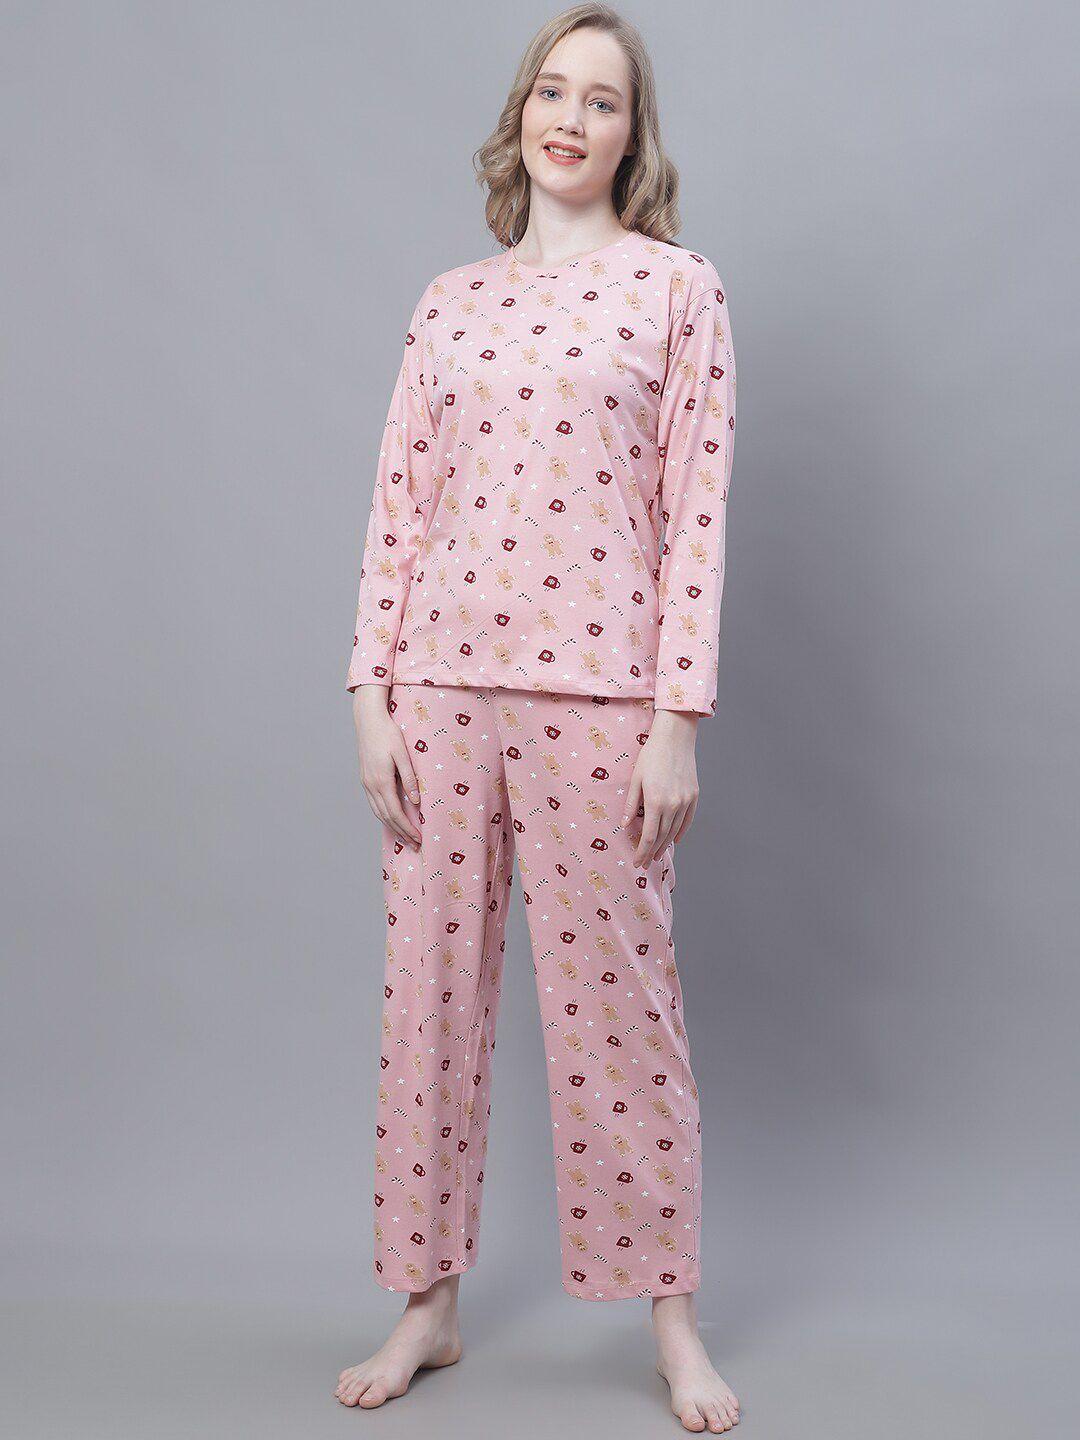 kanvin pink & red conversational printed pure cotton night suit